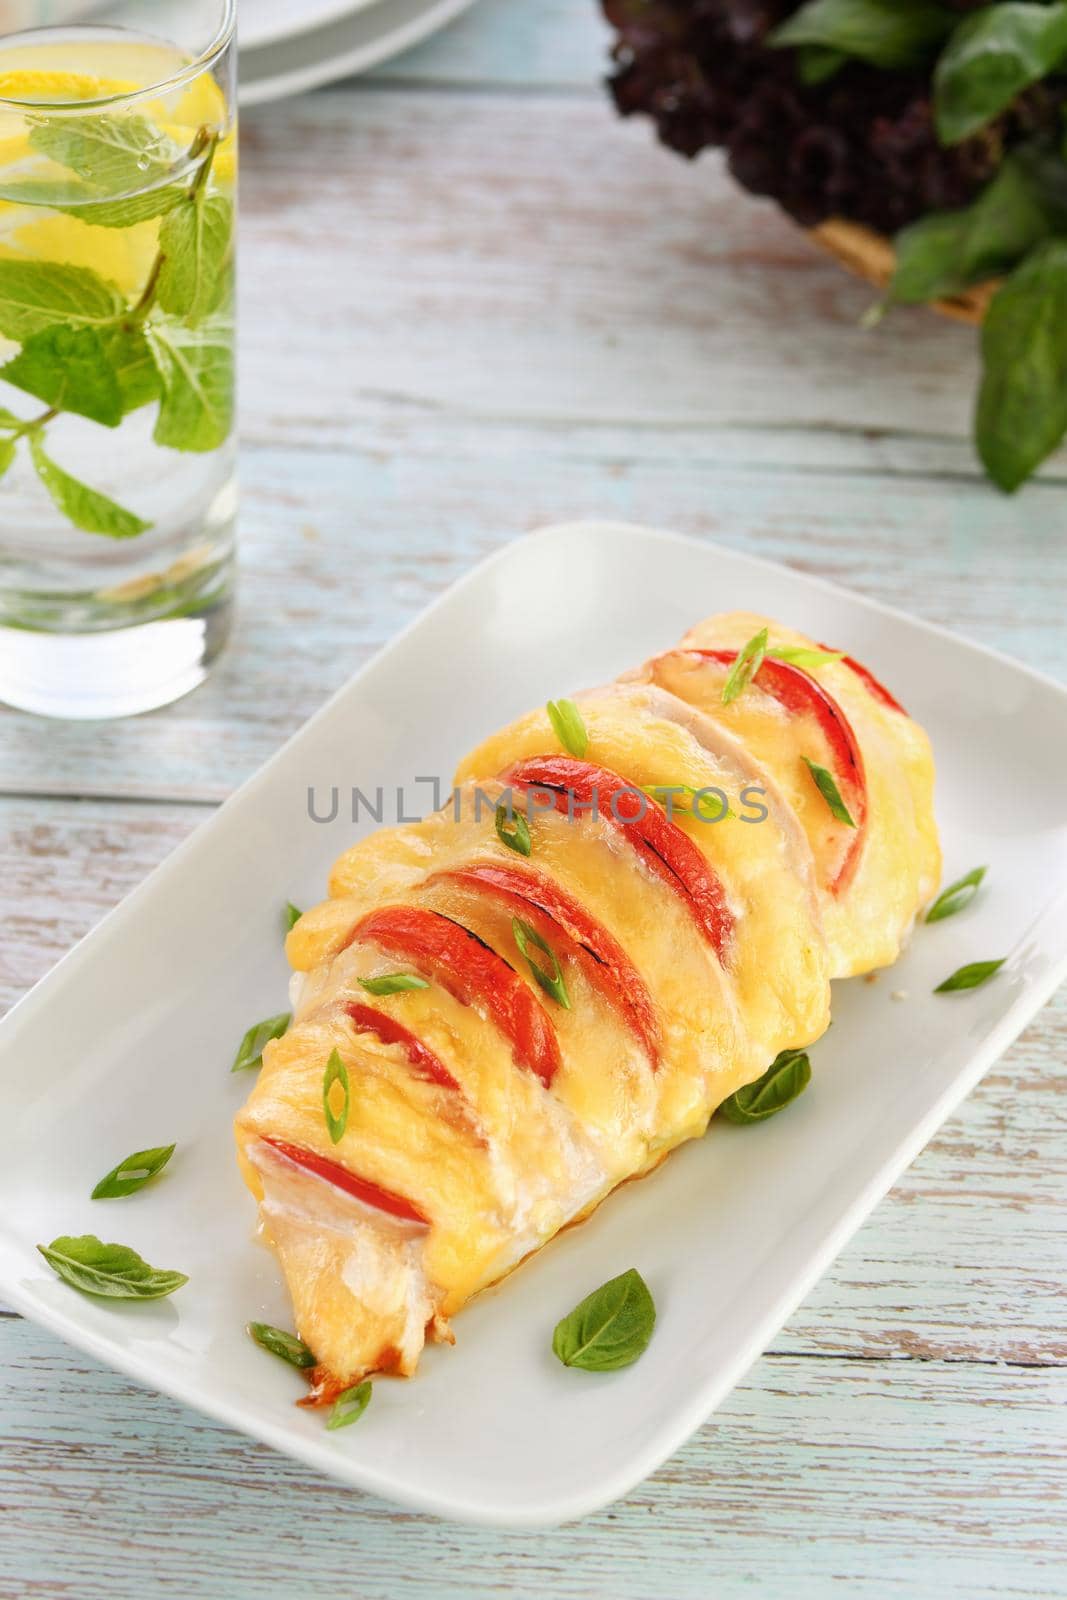 Chicken caprese. Tender chicken breast baked with slices of tomato and cheese.